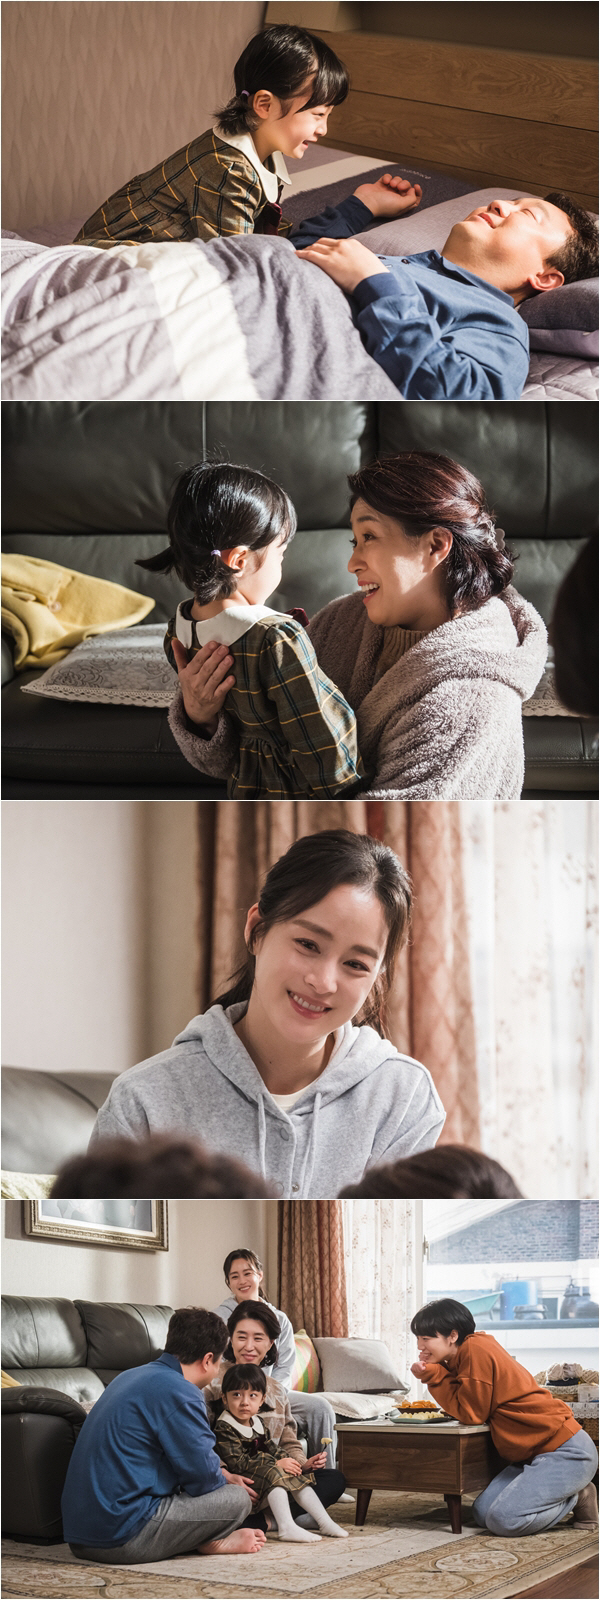 Hi Esporte Clube Bahia,Mama! Kim Tae-hee family spends dreamlike time with Seo WoojinTVN Saturday drama Hi Esporte Clube Bahia, Mama! (directed Yoo Jae-won, playwright Kwon Hye-joo, production studio Dragon and M-I/habama) revealed on the 27th that the family of Kwon Yuri (Kim Tae-hee) had a hard day with Granddaughter Joe Woo (Seo Woojin) who dreamed.After Kwon Yuri suddenly passed away, he wondered what the story of the family who had lived for Joe Woo would come together.The Dead Again Life of Ghost Mom car Kwon Yuri is flowing in an unexpected direction.Kwon Yuri, who was caught by his best friend Ko Hyun-jung (Shin Dong-mi), not only confided in all the secrets, but also had a miraculous reunion with his family.Also, Kwon Yuri did not covet his place because he saw the growth of his daughter, Seo Woo, during his ghosthood, and knew Oh Min-jung (the high priest), who had worked harder for Jo Kang-hwa (Lee Kyu-hyung) and Seo Woo than anyone else.So Kwon Yuri just turned his ghost daughter, Seo Woo, back to his original state and tried to leave the world without hesitation.But Kwon Yuri, who regained her forgotten daughters seat while reuniting with her family.I am curious about whether he will steadily carry out the mission, which gave up Dead Again while showing his willingness to live.In the meantime, the photo shows the picture of Kwon Yuri and his family who are having a happy time and attracts Eye-catching.The figure of Joe Woo, who smiles while looking at his father Cha Moo-pung (Park Soo-young), who sleeps in ordinary everyday life, is lovely.The same is true of the unbelievable appearance of Joe Woo, and the same is true of his mother, Jeon Eun-sook (played by Kim Mi-kyung).Granddaughter The family who pressed the heart to see the heart that the Joe Woo wants to live a normal life like others.I do not leave a happy smile on the face of Joe Woo, who wanted to see so much, and Kwon Yuri, who watches the family who is having a dream life.I wonder what the story of Joe Woo came to the house of Kwon Yuri and what kind of change the mind of Kwon Yuri brought to the Dead Again Life while the identity of Kwon Yuri has not been revealed to Oh Min-jung yet.Kwon Yuris Dead Again Life has entered a full-scale countdown.Kwon Yuri, who was shaken by the news that Oh Min-jung was preparing for a divorce with Cho Kang-hwa, decided to spend all his time for Joe Woo.Joe Woos House assistant had entered the house and succeeded in fighting the bombardment, but still he was anxious about his mind because of Joe Woo, who saw ghosts.There are unexpected variables such as the appearance of a man who has come to pick someone up here, and the unexpected change in the Dead Again Life of Kwon Yuri is being detected and stimulating curiosity.Moreover, Kwon Yuri, who was reunited with his family, revealed his willingness to live by realizing that Cha Moo-pung and Jeon Eun-sooks daughter are also precious.Attention is focusing on whether the car, which decided to ascend after returning only her daughter, Seo Woo, will go to the Dead Again mission, which she had delayed to stay with her family.Meanwhile, the TVN Saturday drama Hi Esporte Clube Bahia, Mama! will air 11 times tomorrow (28th) at 9 p.m.